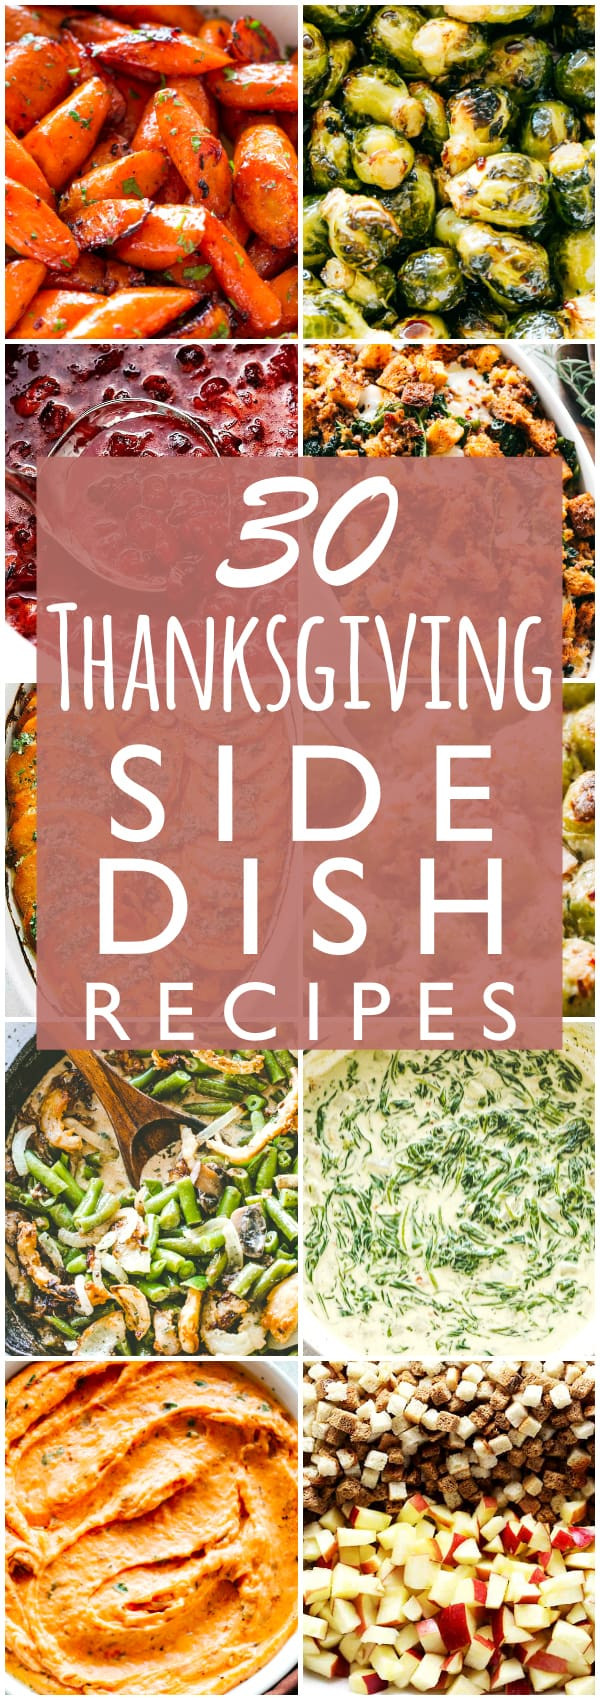 Awesome Thanksgiving Side Dishes
 30 Thanksgiving Side Dish Recipes